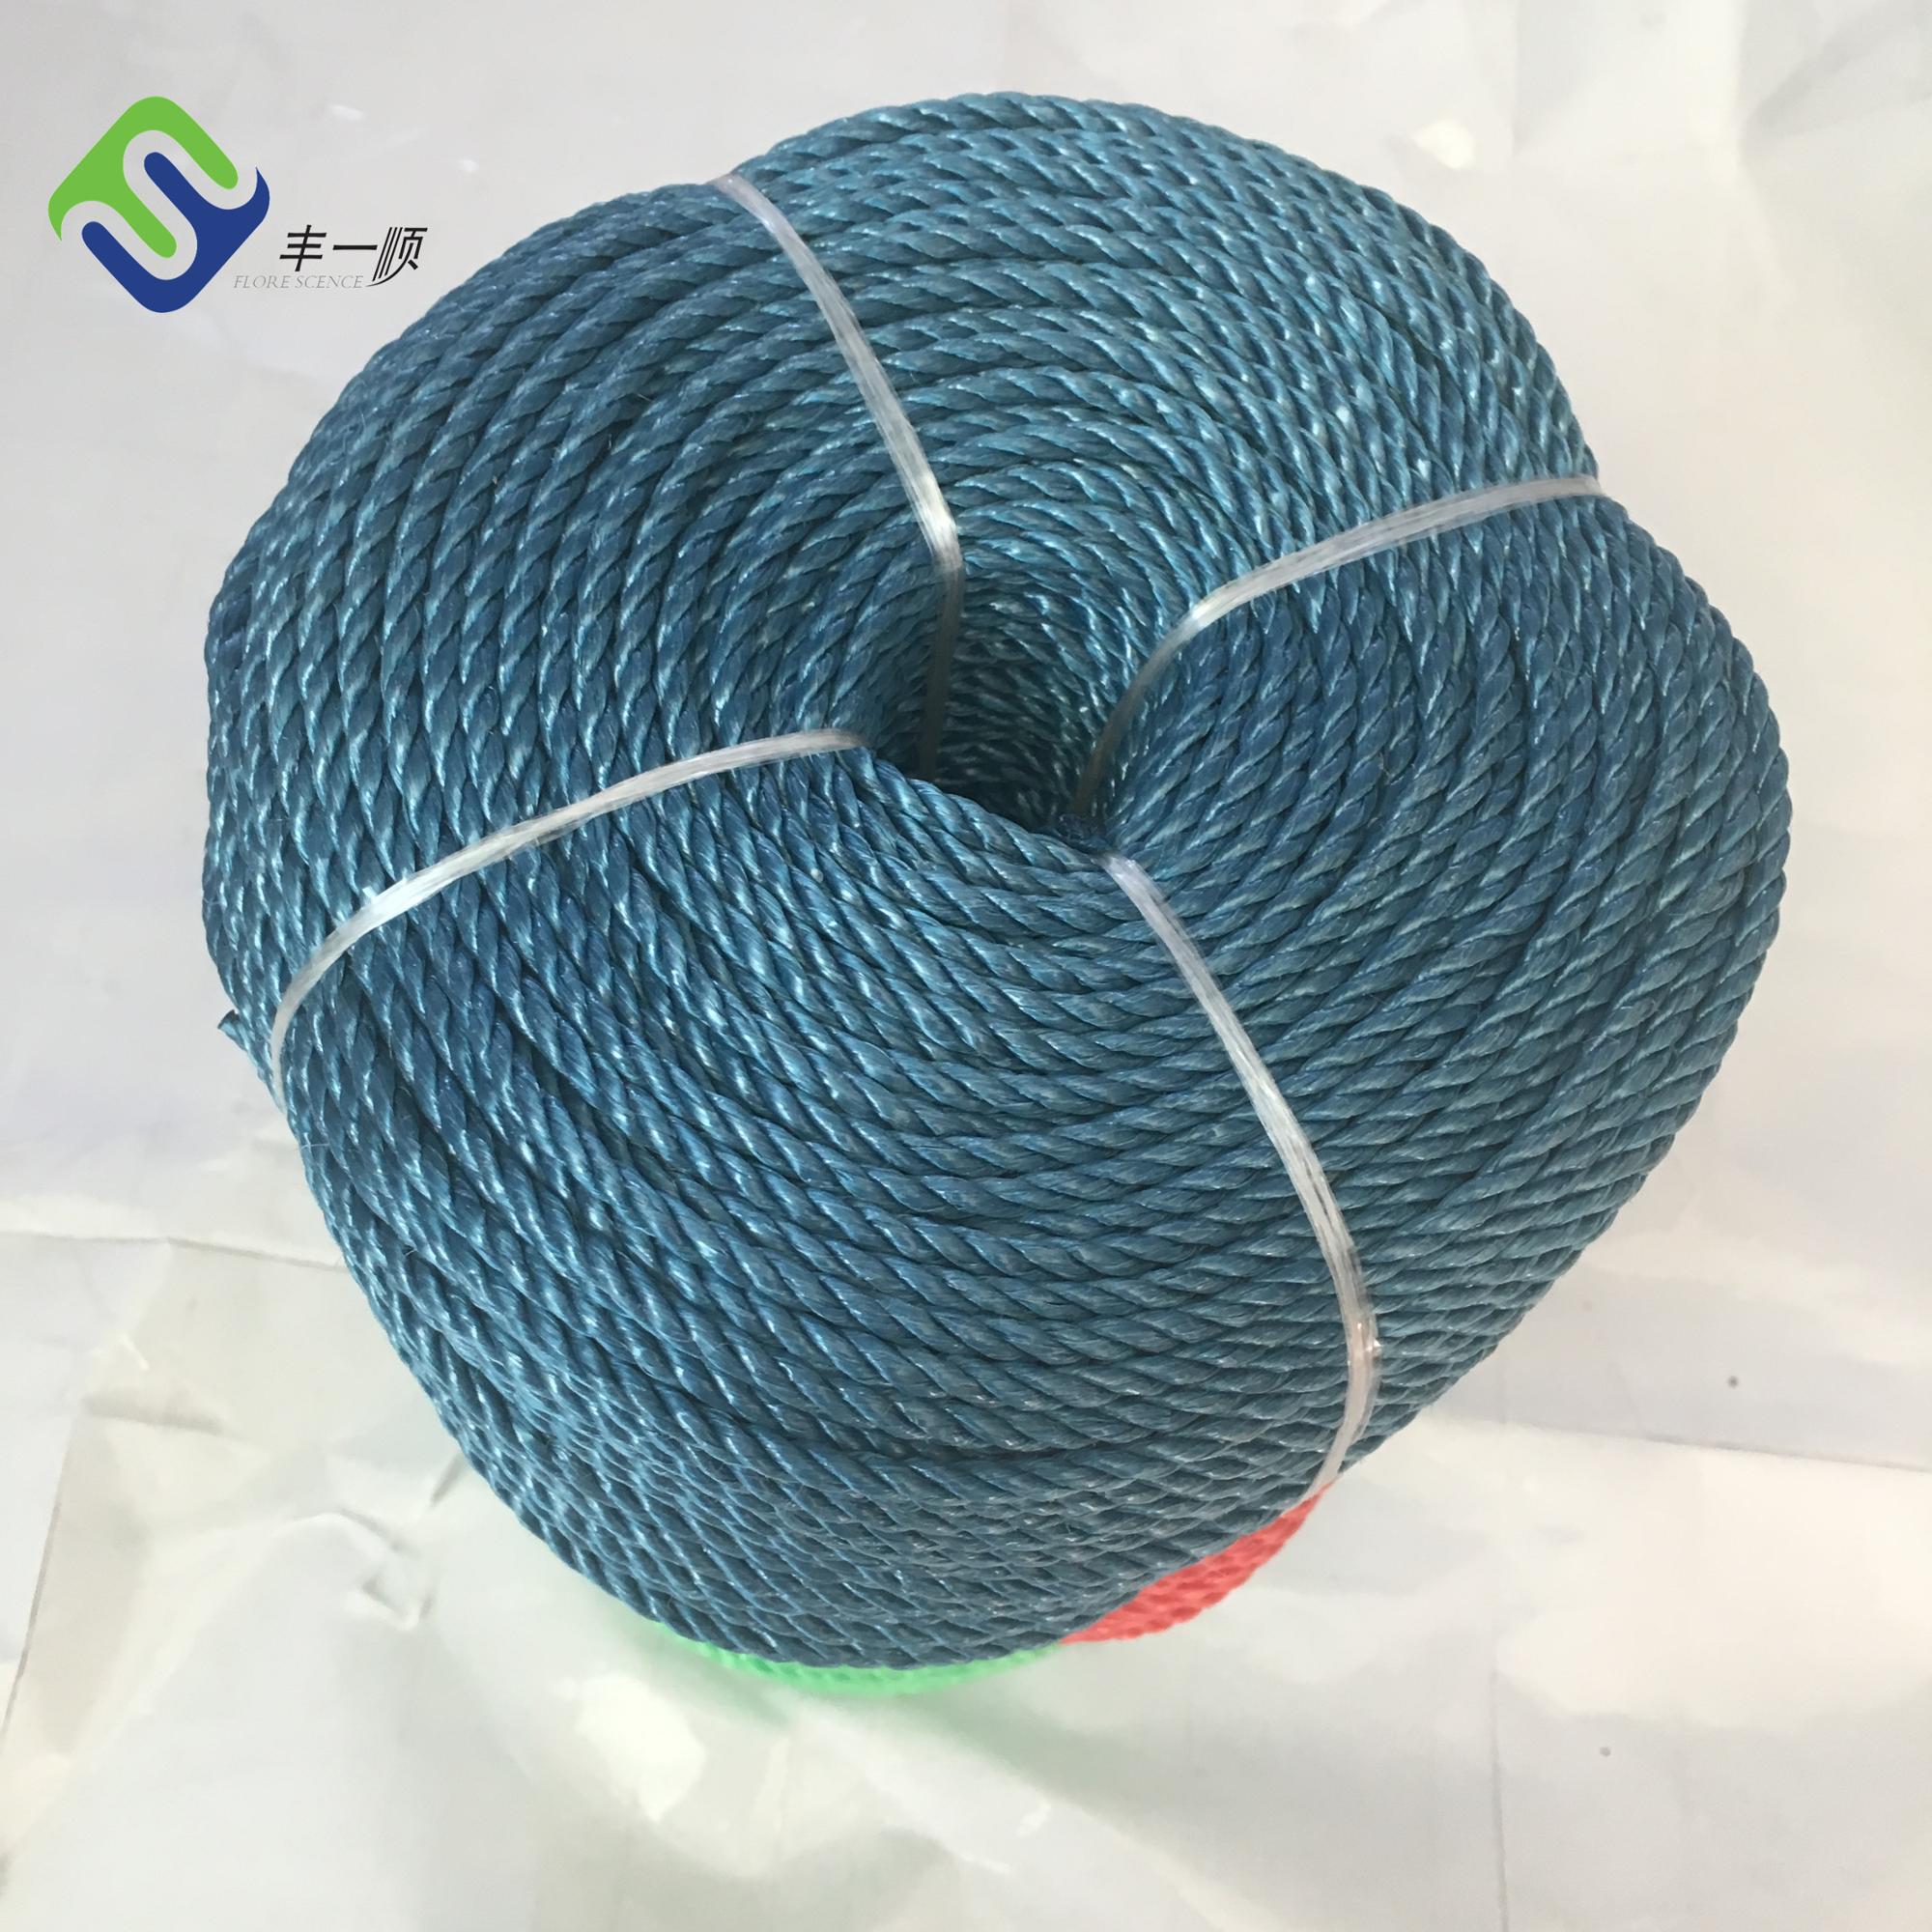 China Quality assured PP plastic packing rope factory and